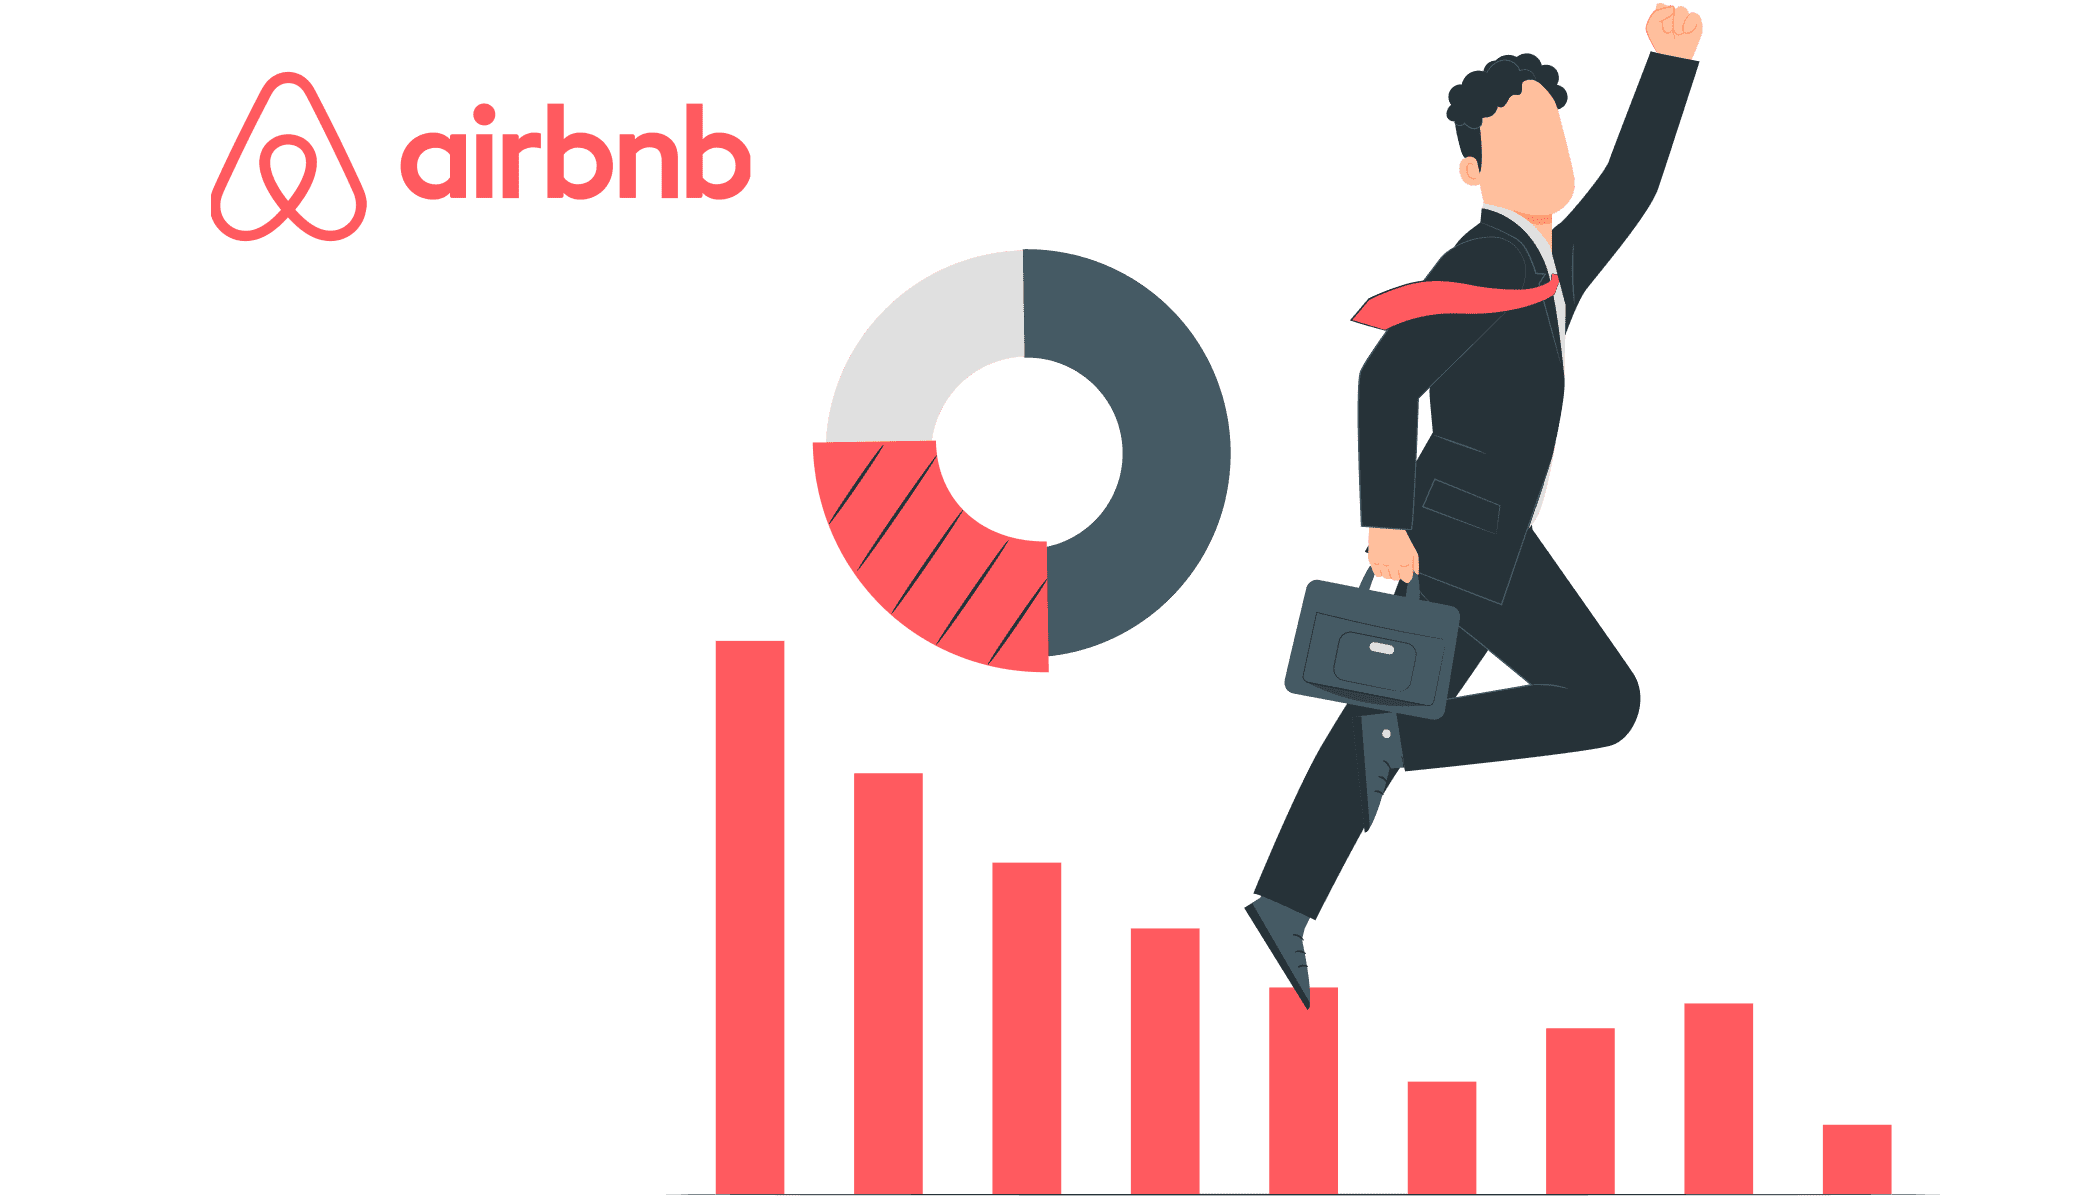 Airbnb business